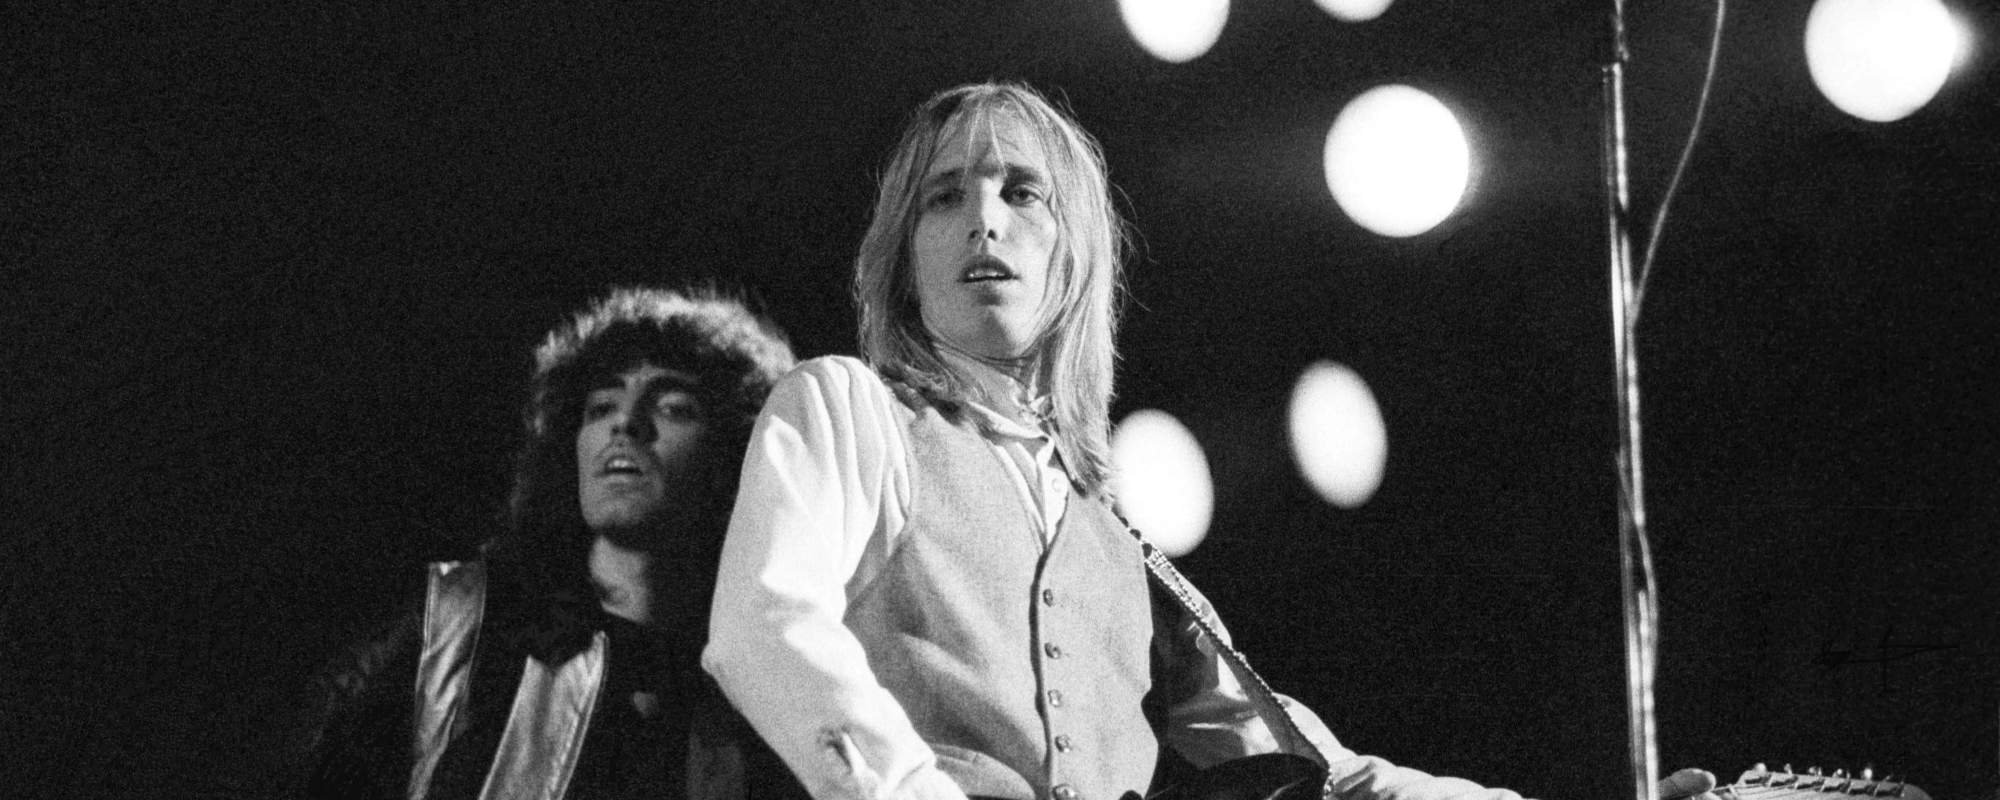 What Do the Lyrics of Tom Petty's Now-Politically-Charged Song "I Won't Back Down" Mean?